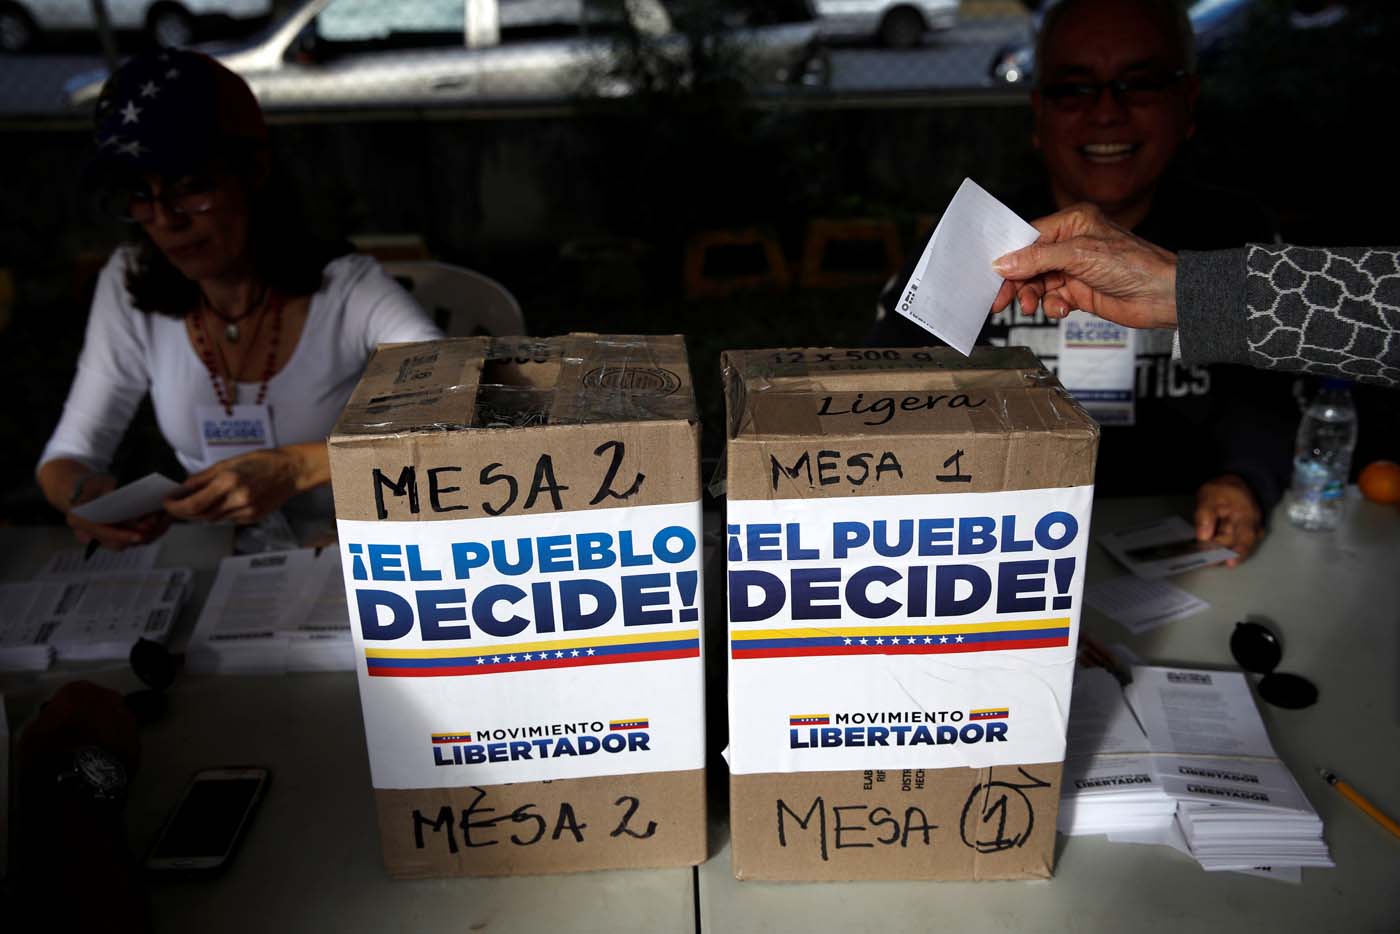 A woman casts her vote during an unofficial plebiscite against Venezuela's President Nicolas Maduro's government and his plan to rewrite the constitution, in Caracas, Venezuela July 16, 2017. The writing on the boxes read "The people decide, Liberator Movement." REUTERS/Carlos Garcia Rawlins